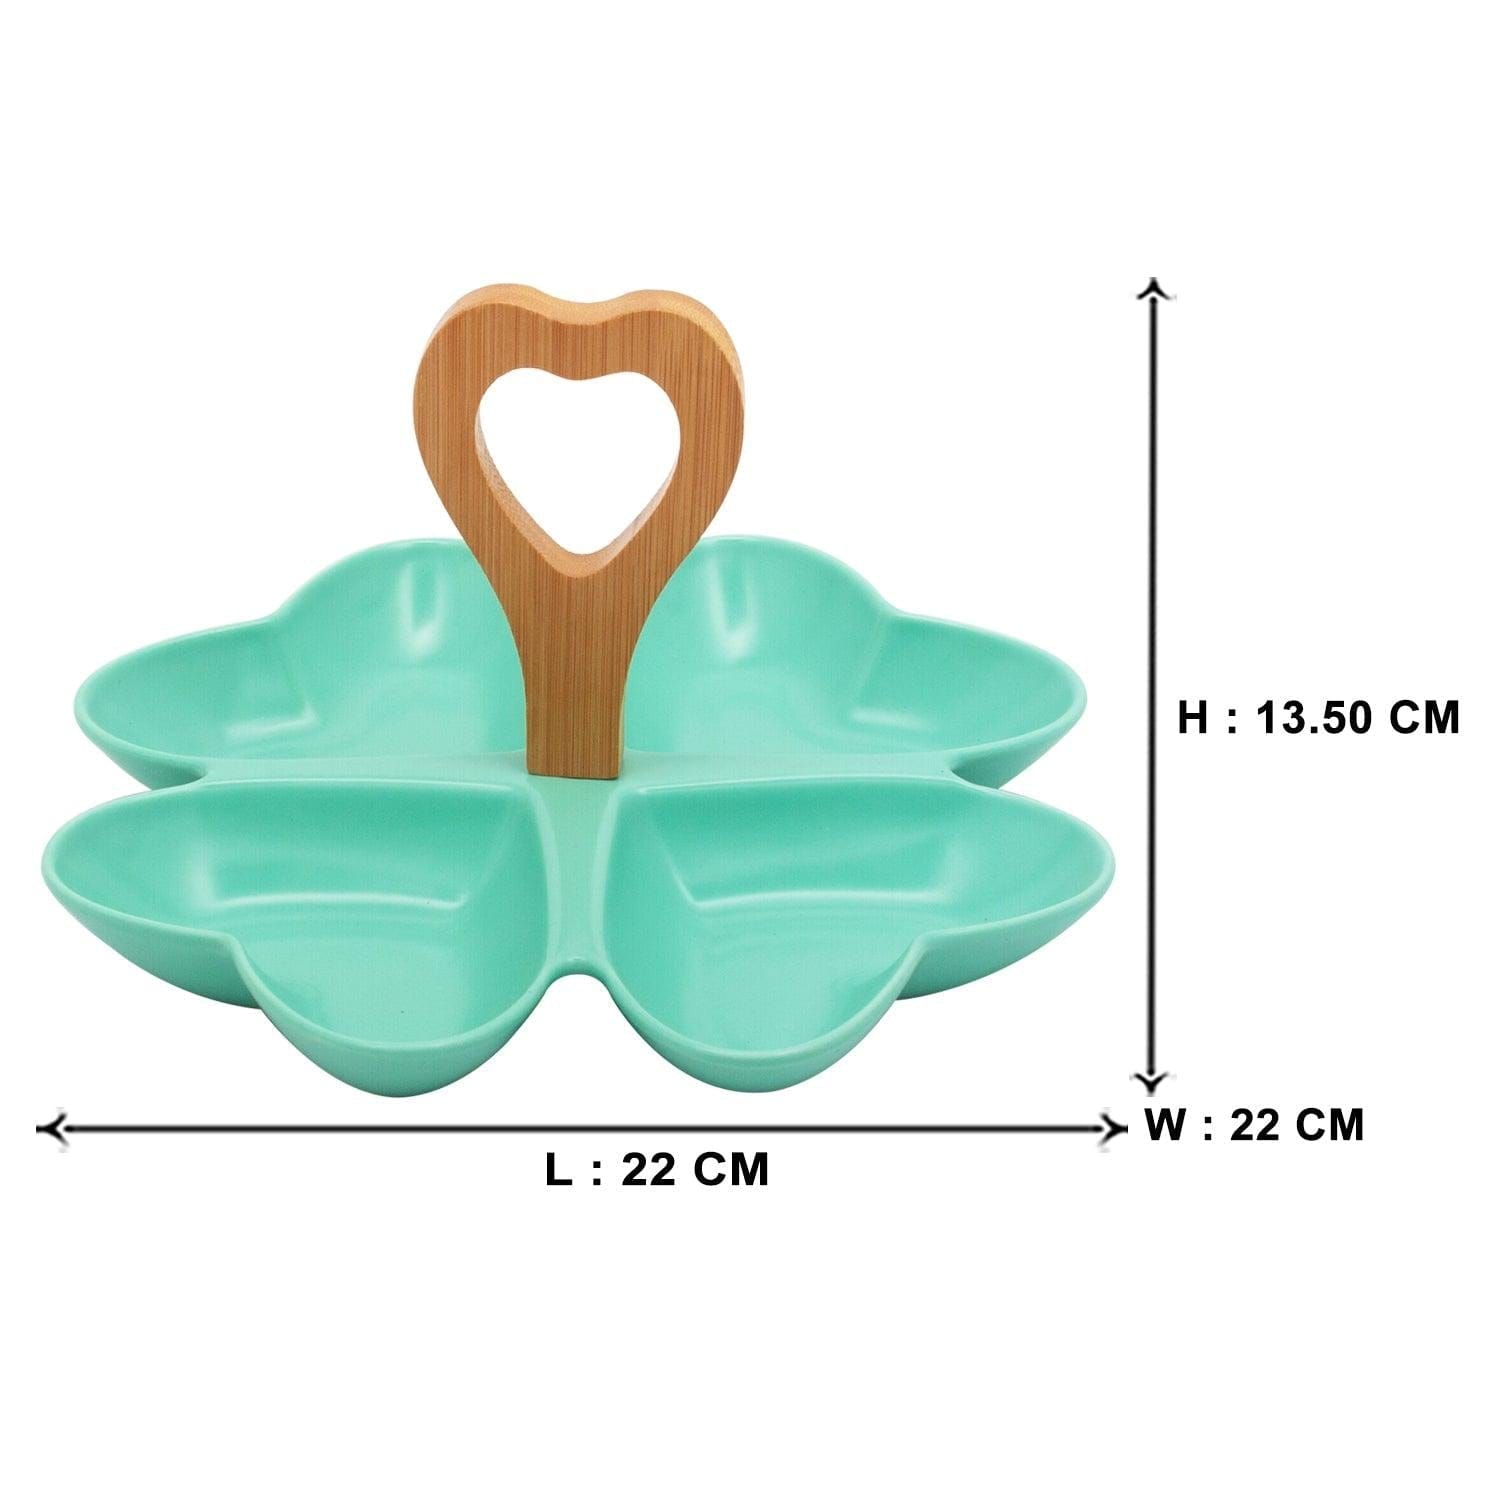 4 Compartment Hearty Green Ceramic Serving Platter with Wooden Handle